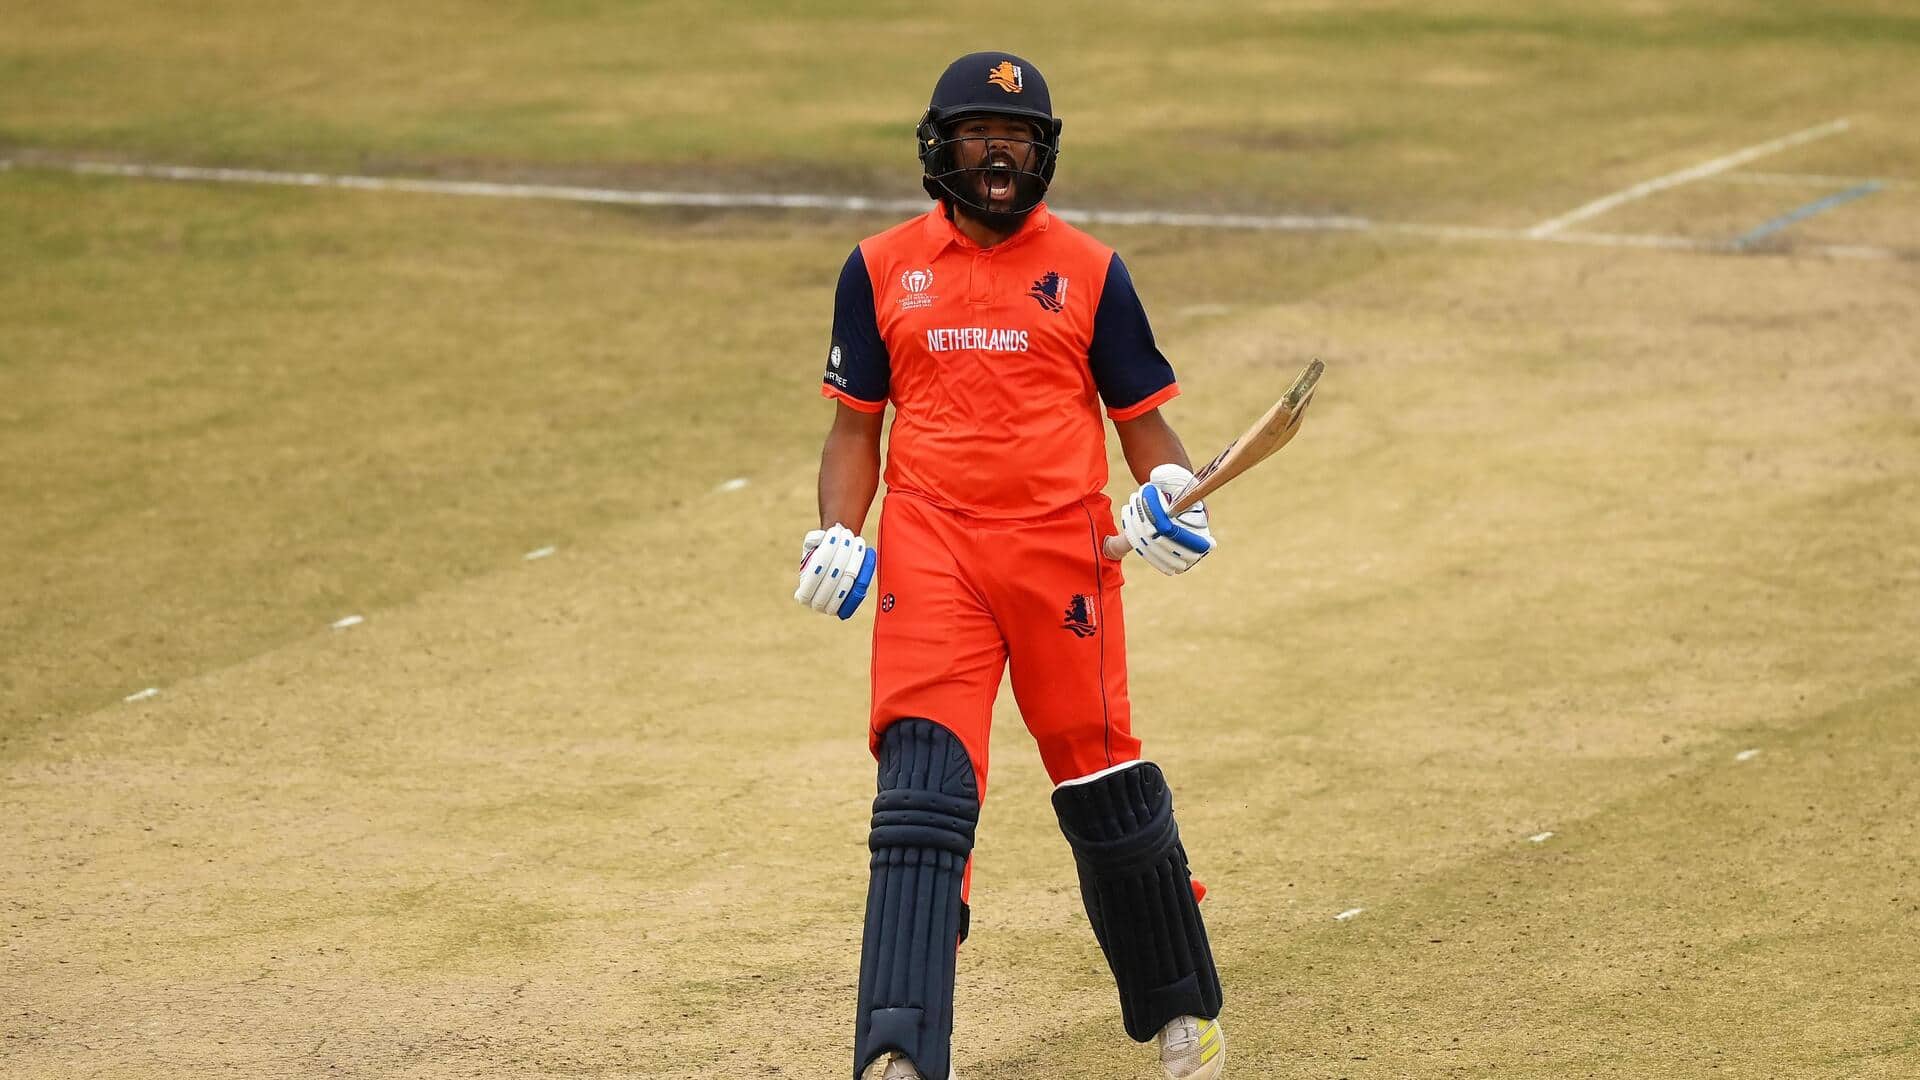 CWC Qualifiers: Netherlands stay in contention with win over Oman